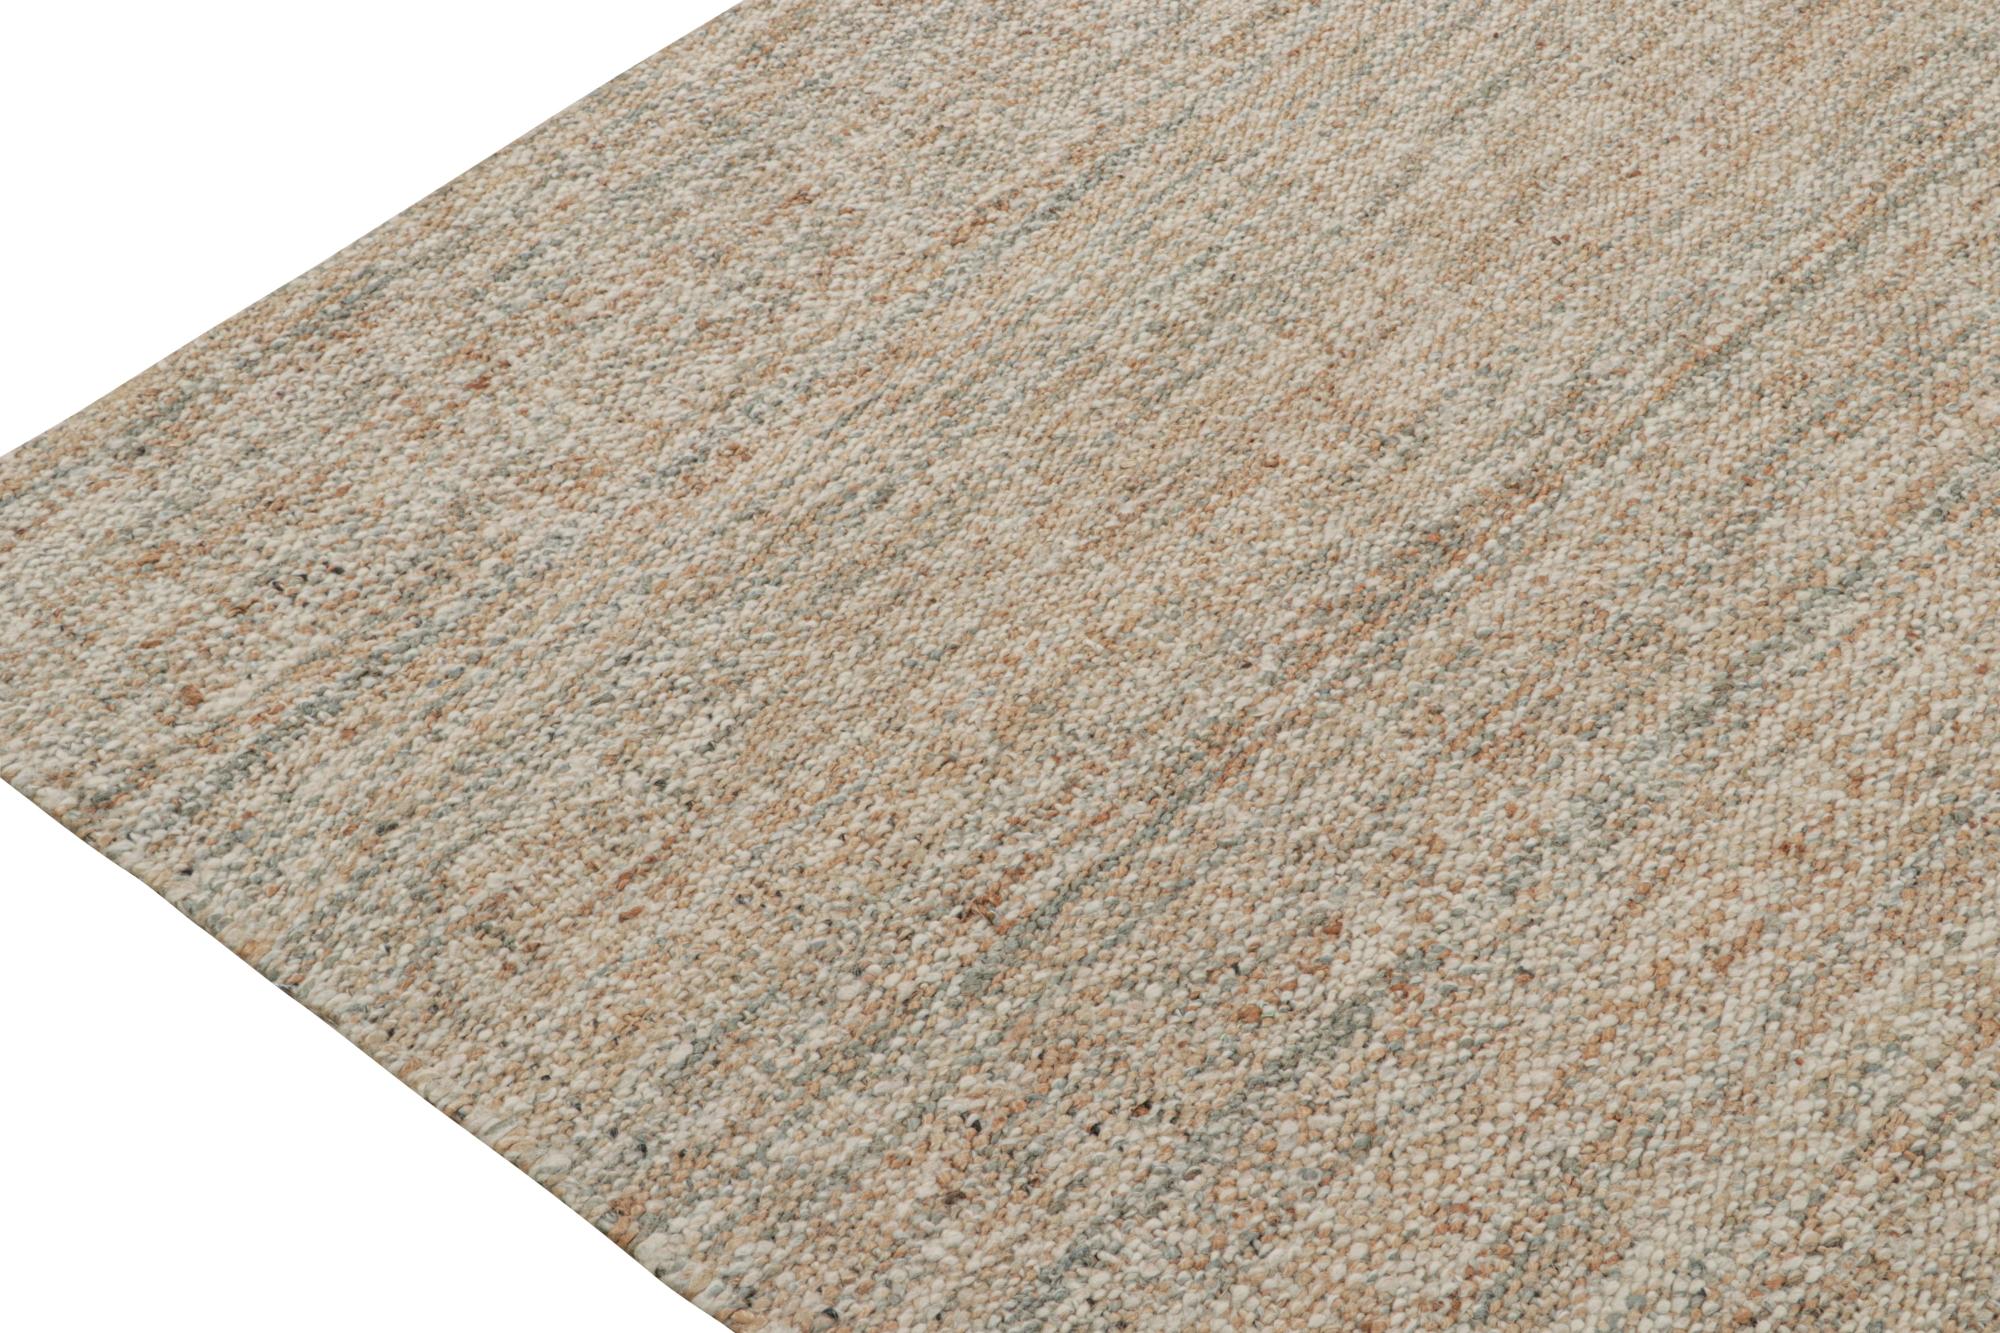 Rug & Kilim’s Contemporary Jute Kilim in Beige-Brown In New Condition For Sale In Long Island City, NY